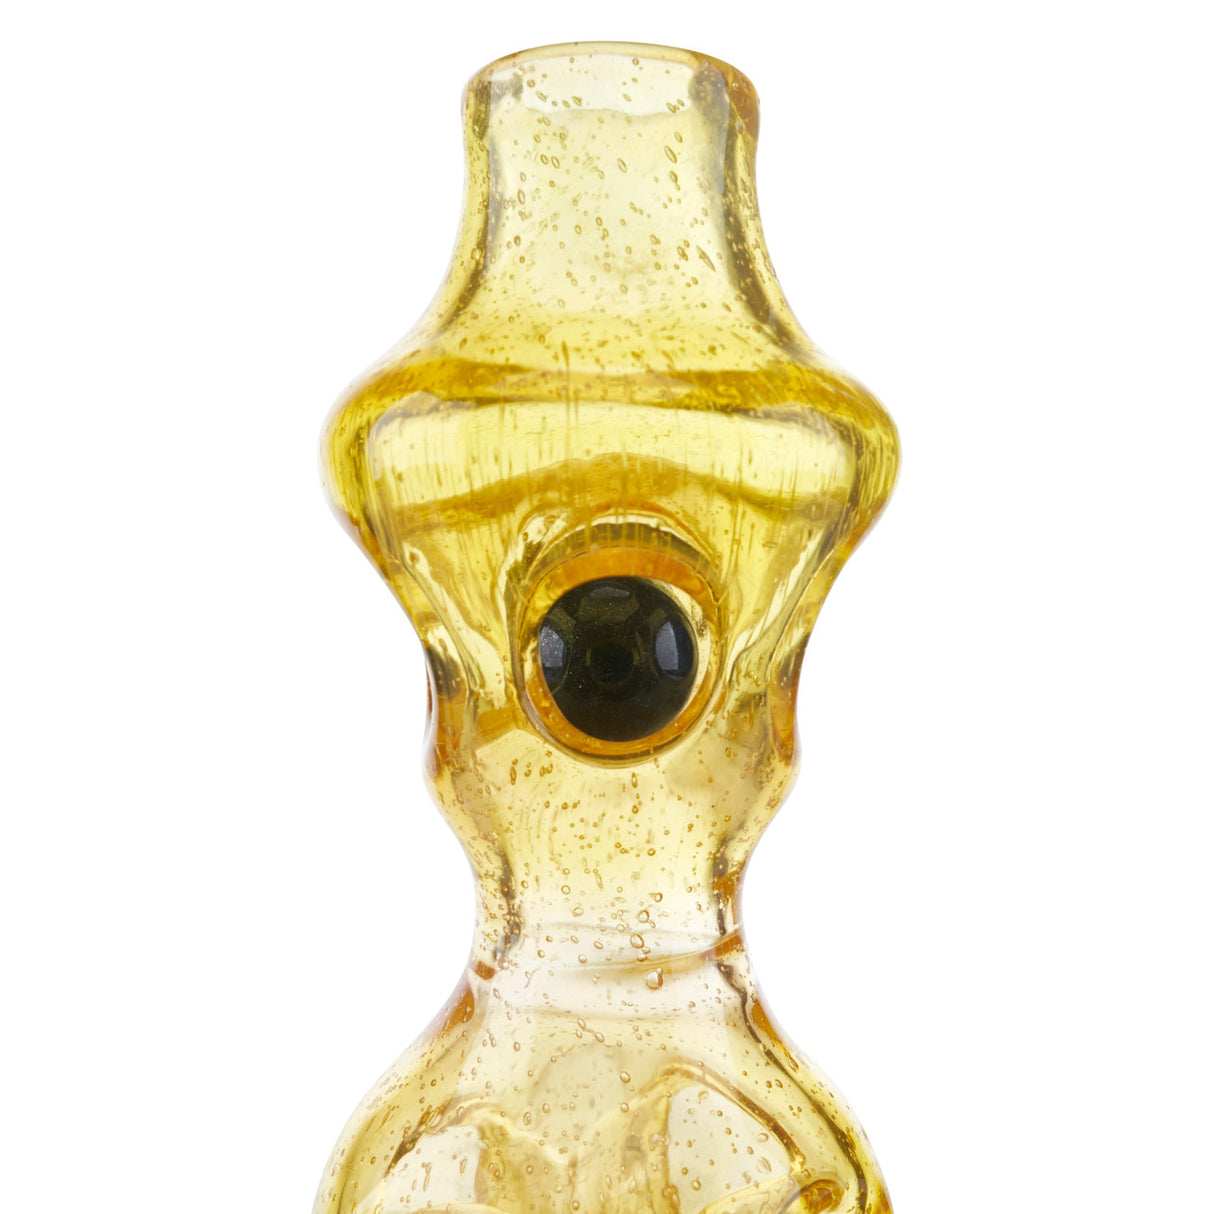 logan mcsporin wormhole pipe with glass marble inside